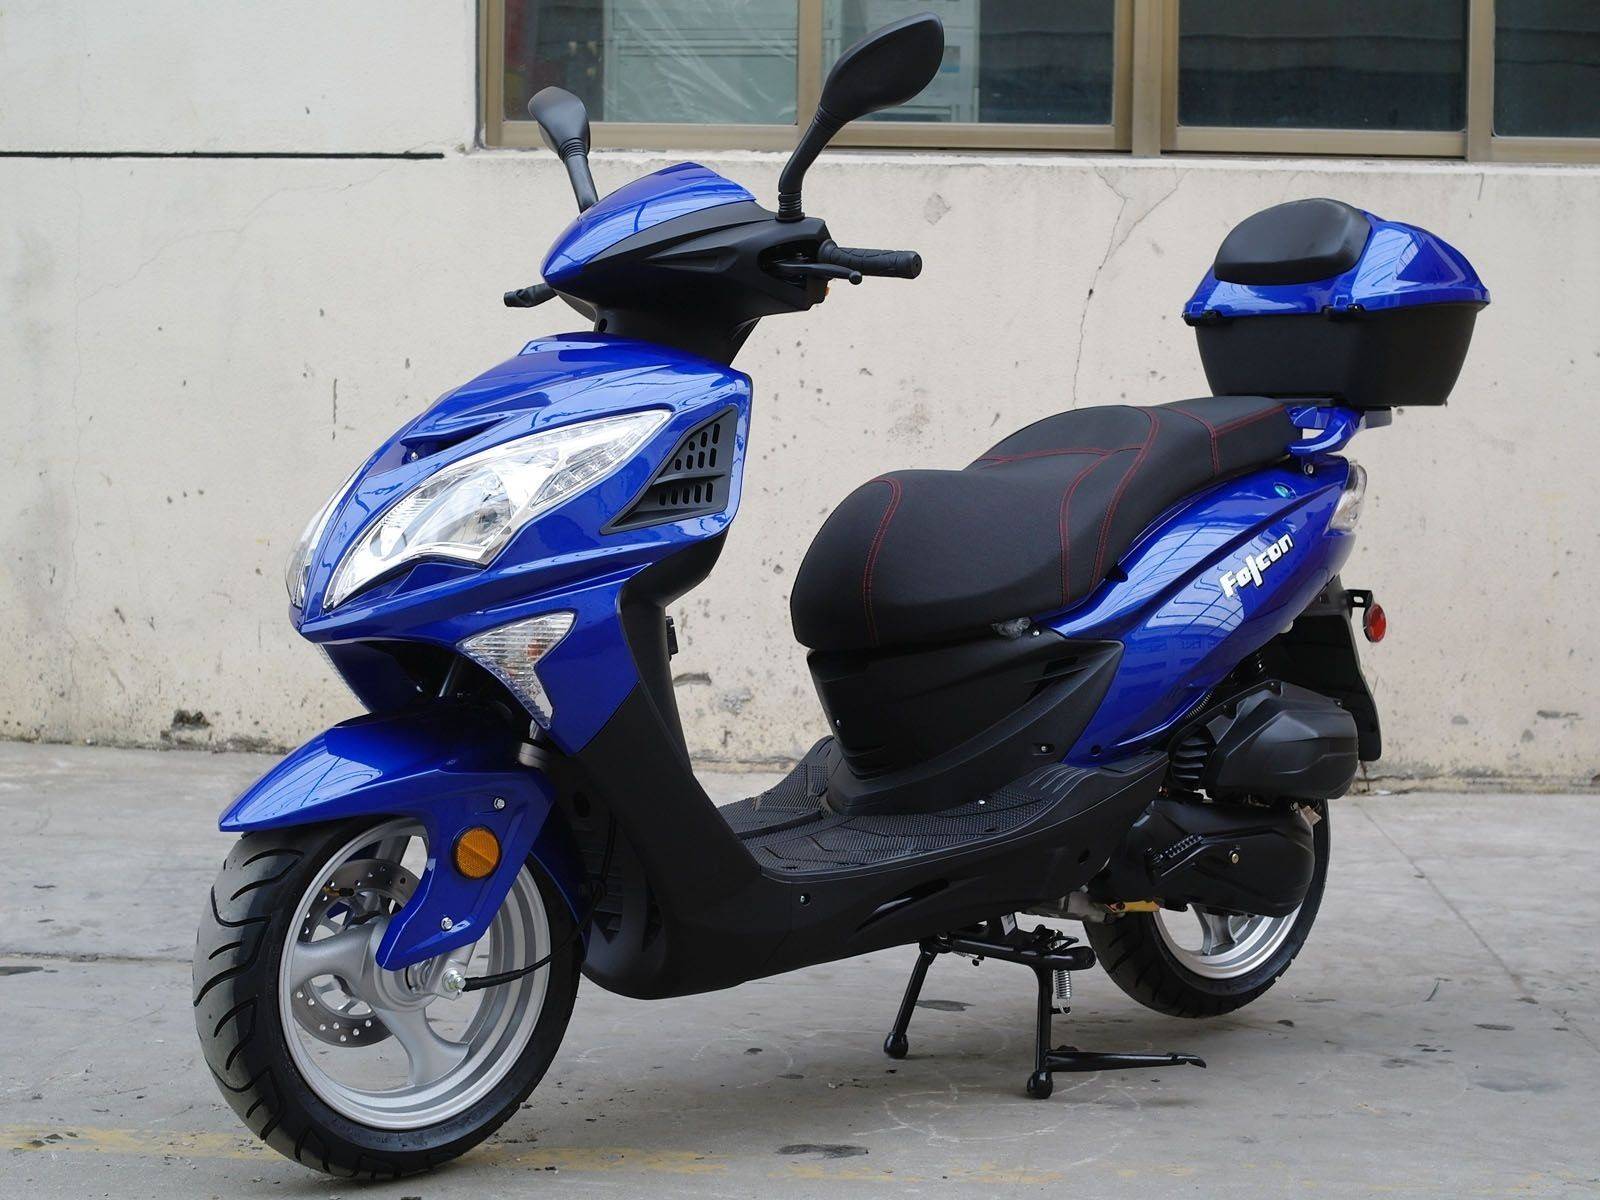 200cc Gas Moped Scooter Automatic Wheel Falcon Blue, Body CVT Big redfoxpowersports 200cc Engine, and 